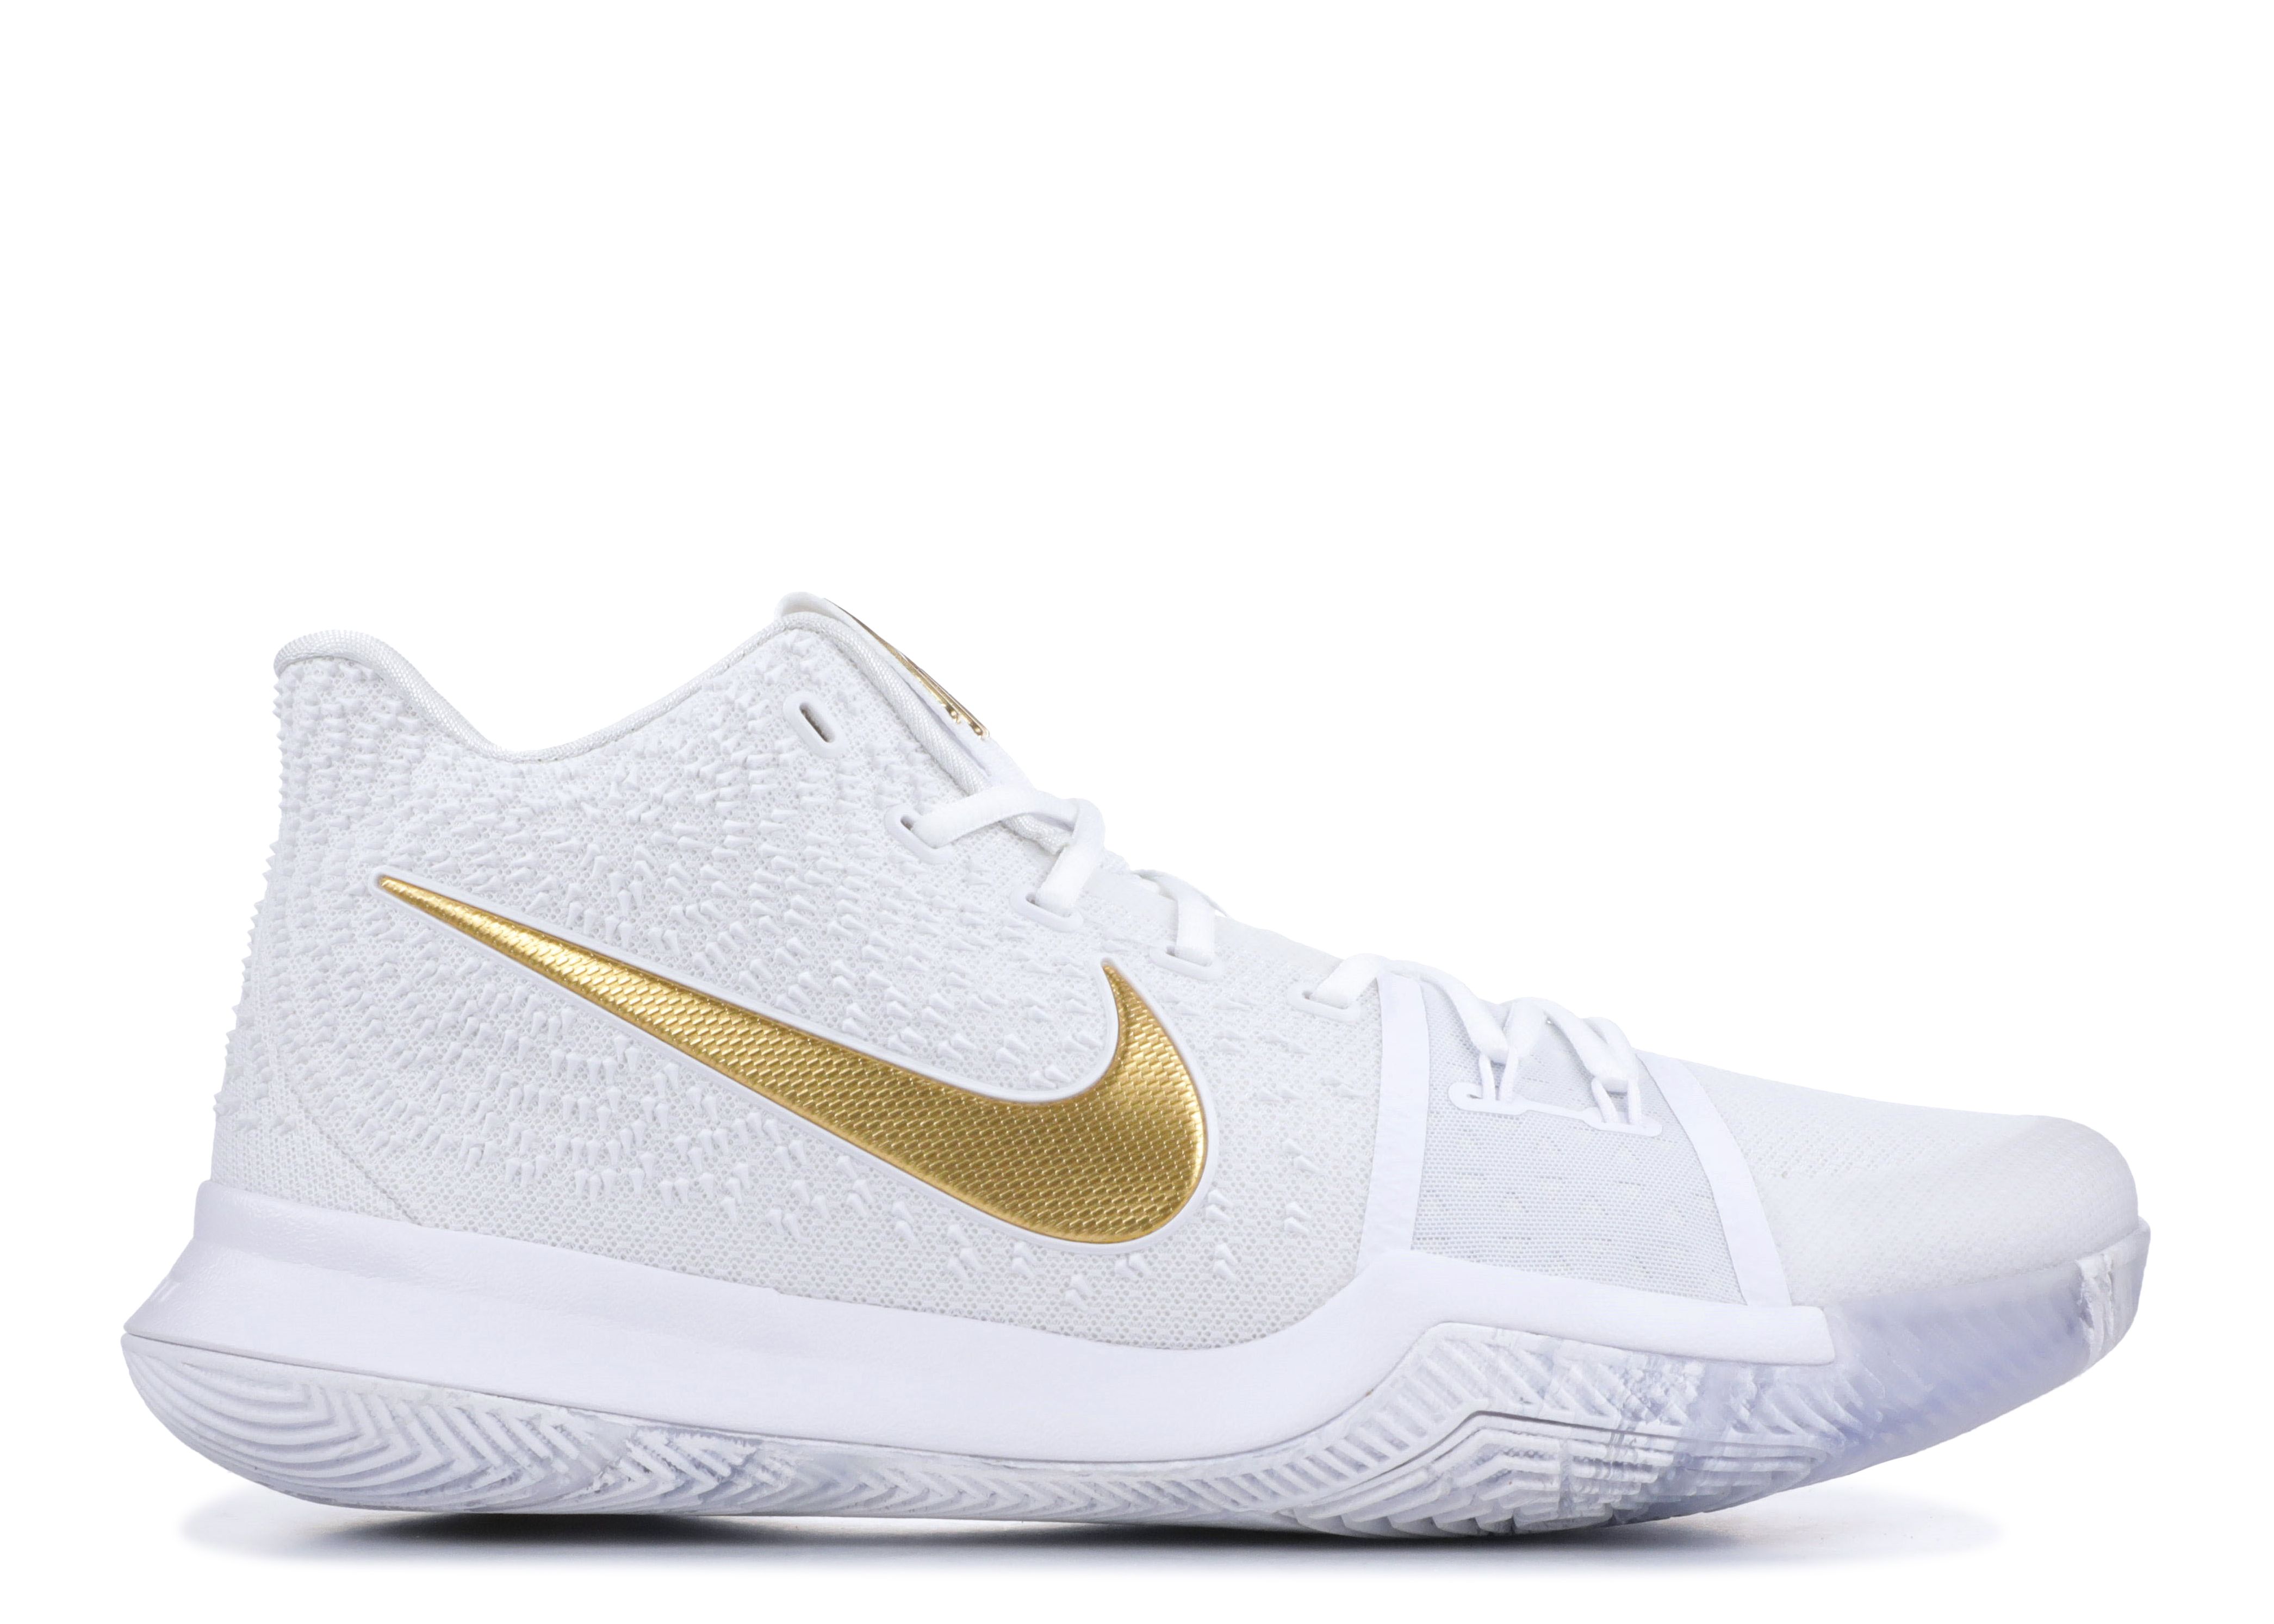 kyrie irving shoes white